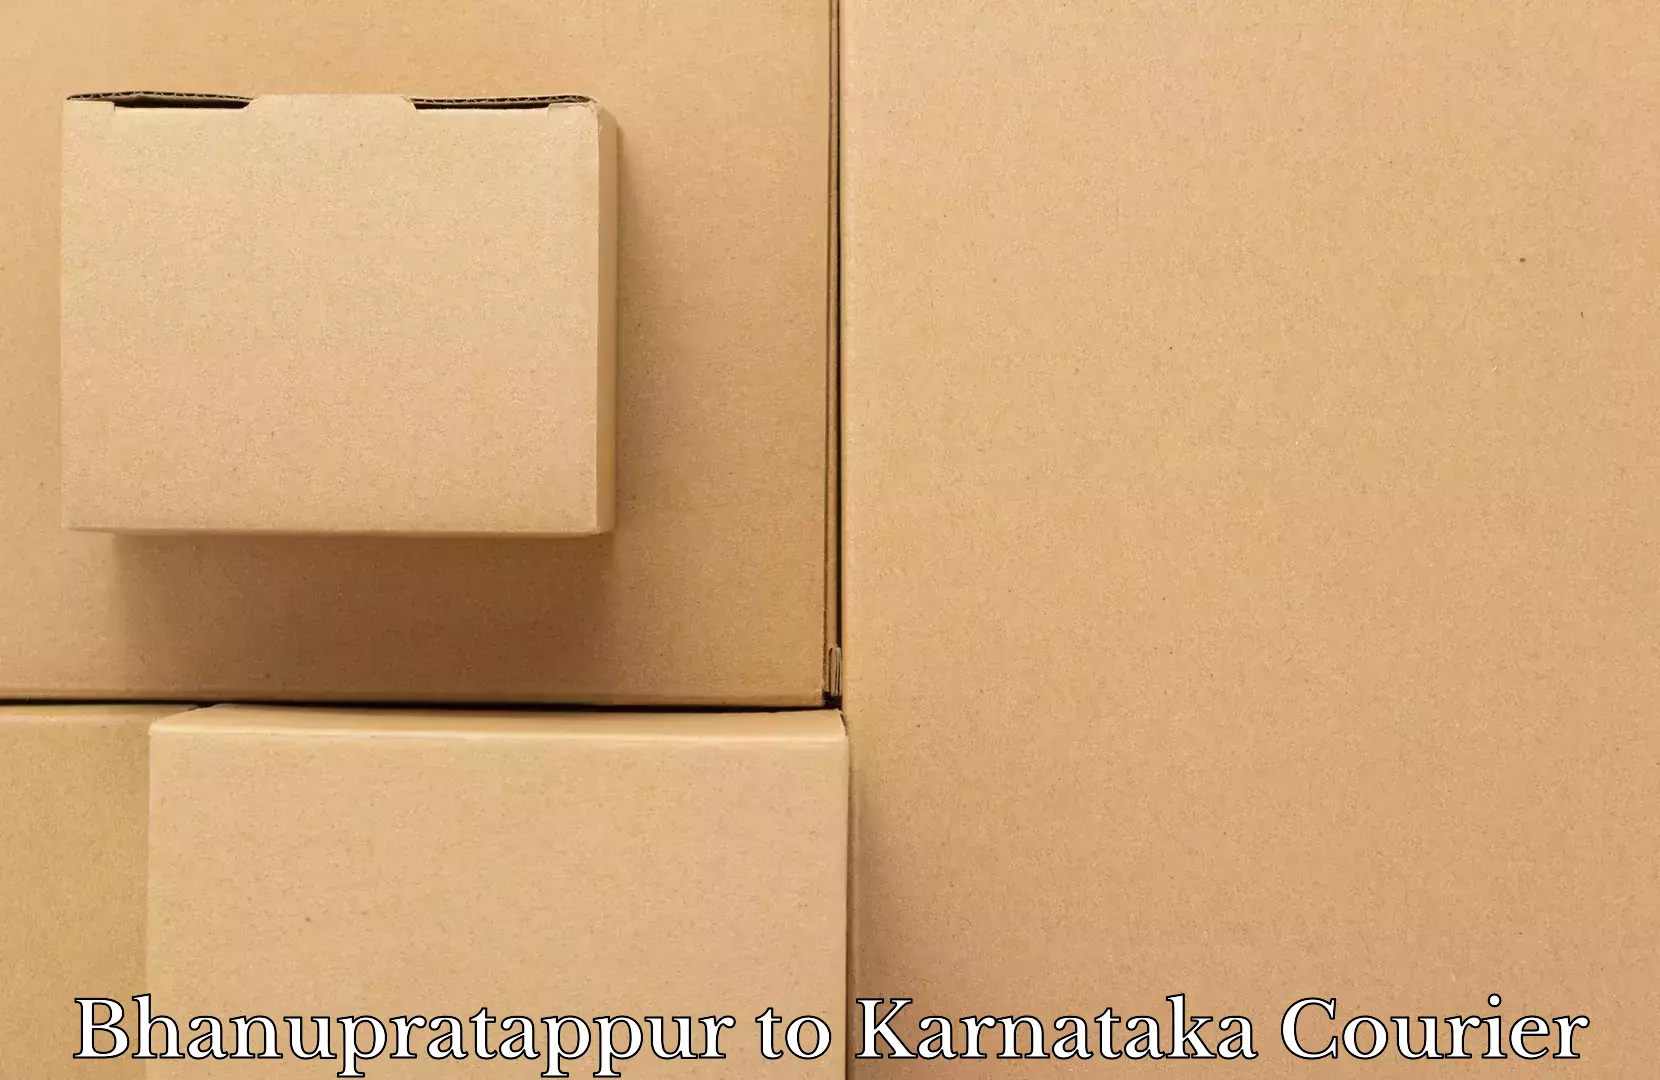 Personal effects shipping Bhanupratappur to Yellare